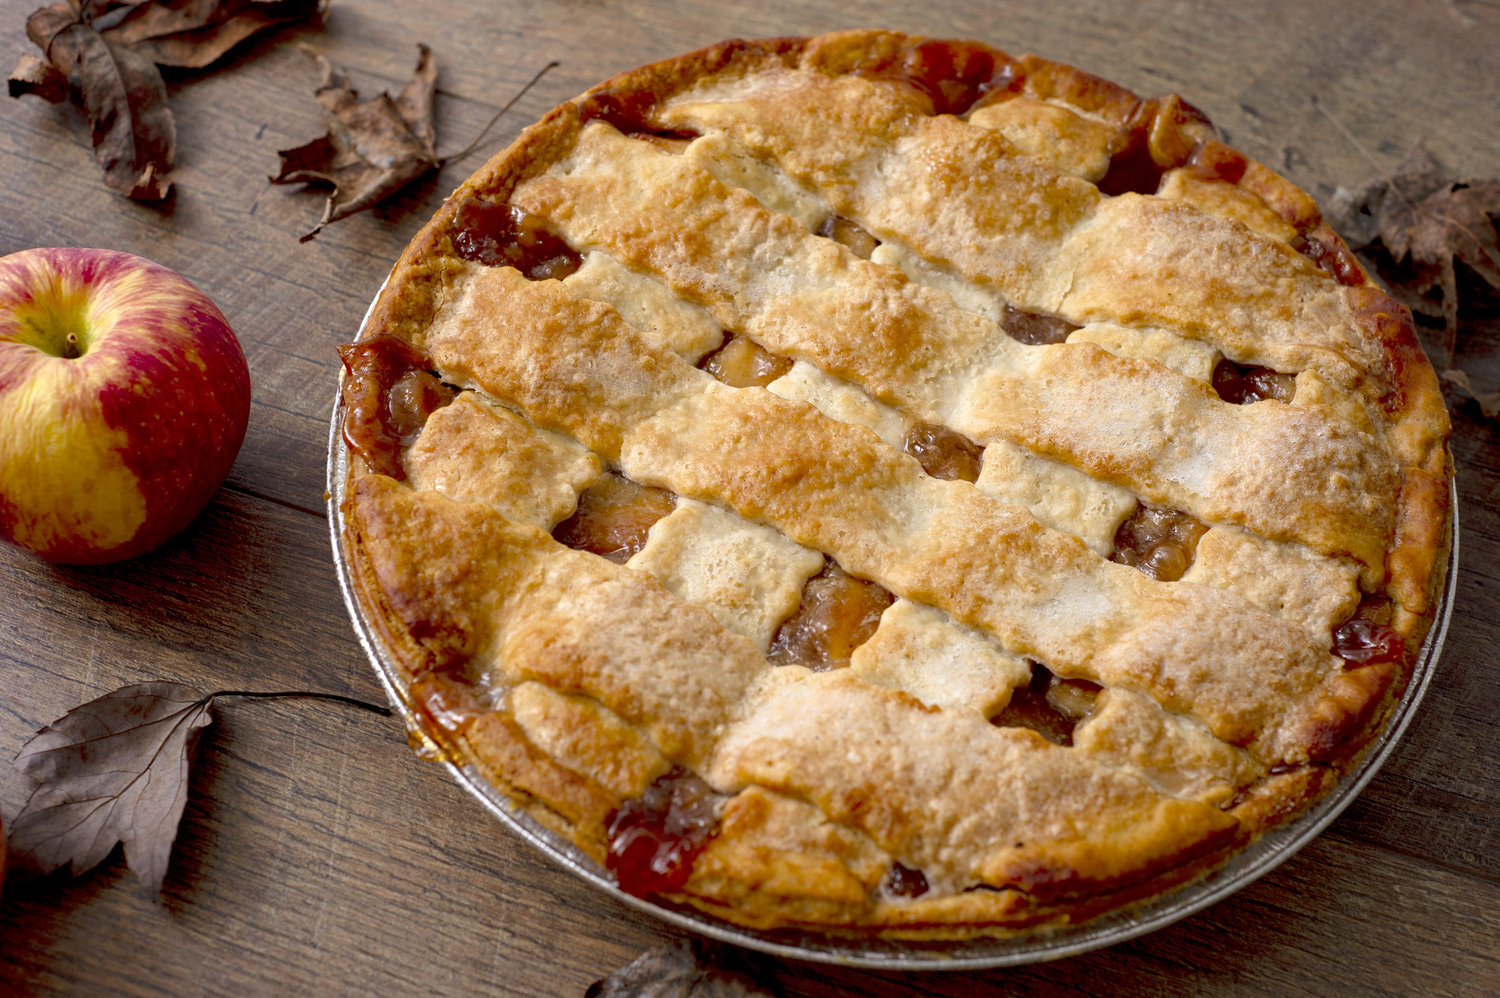 Homemade apple pies will be sold for $15.